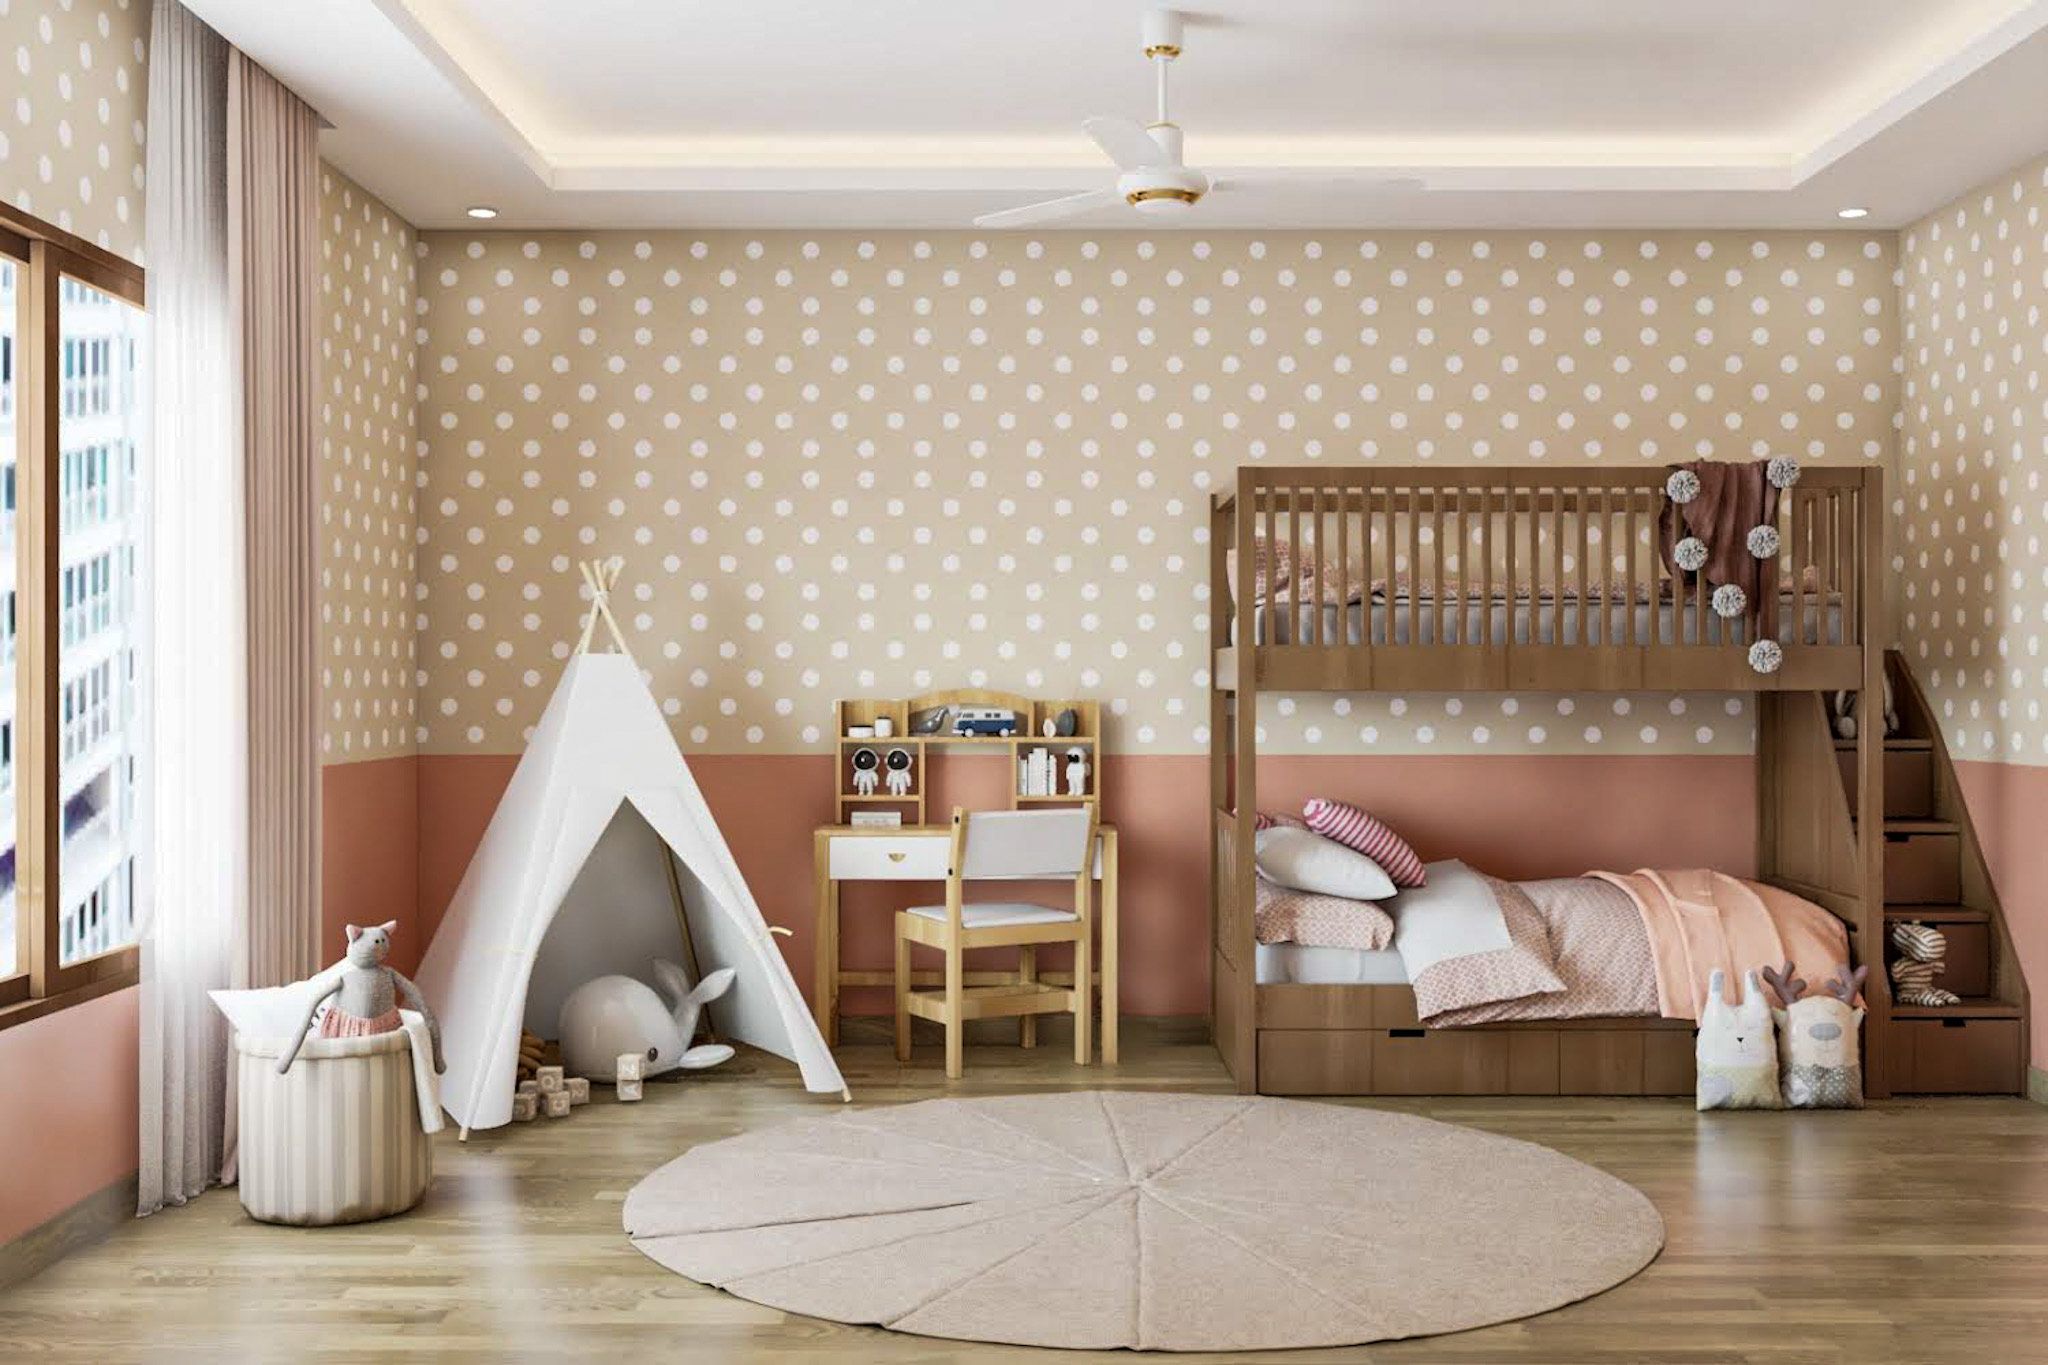 Contemporary Kids Room Design WIth Wooden Bunk Bed And White Tipi